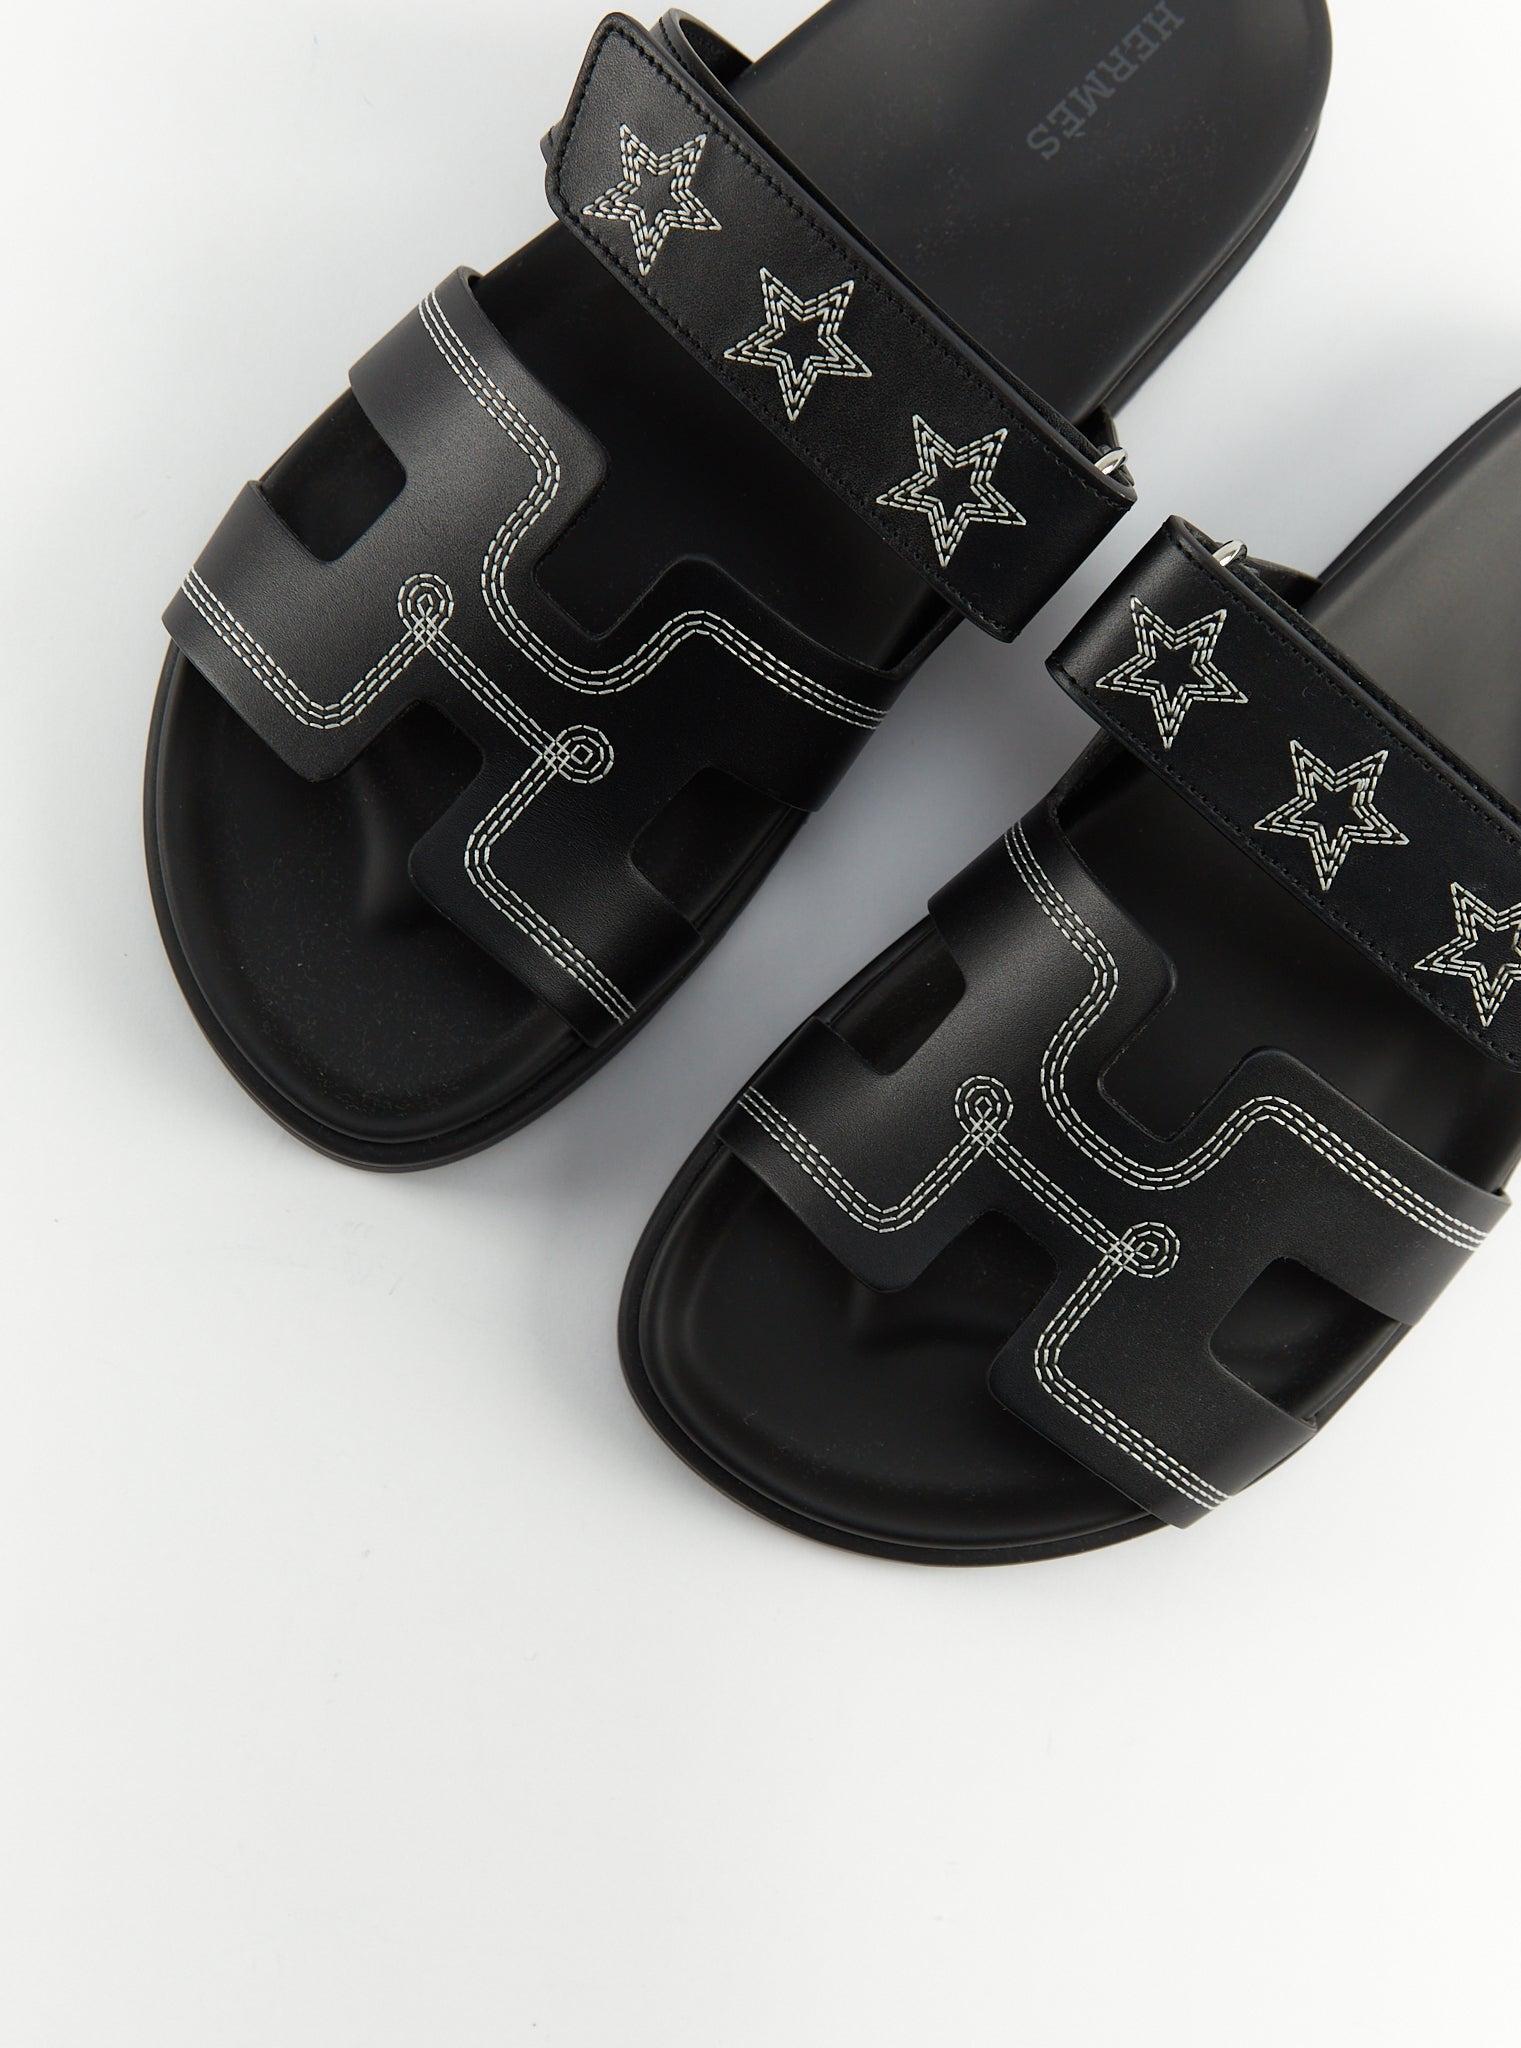 HERMÈS CHYPRE STAR SANDAL Black - Size 37 In Excellent Condition For Sale In London, GB